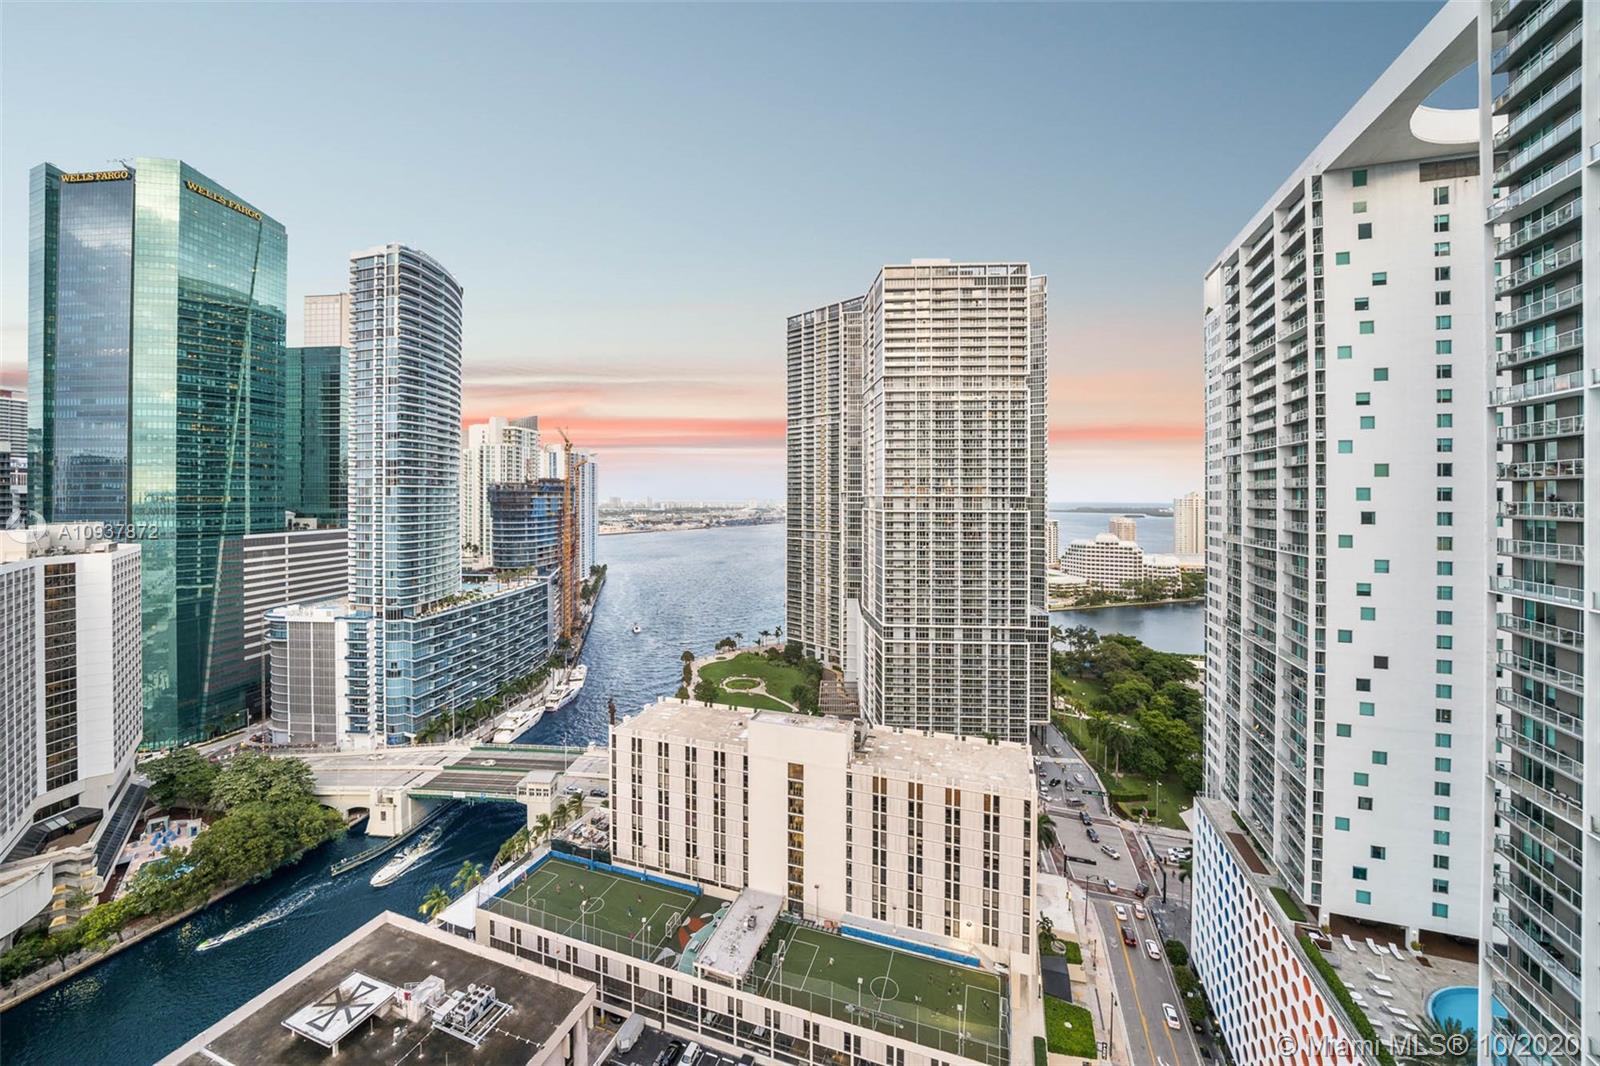 Brickell on the River South image #27